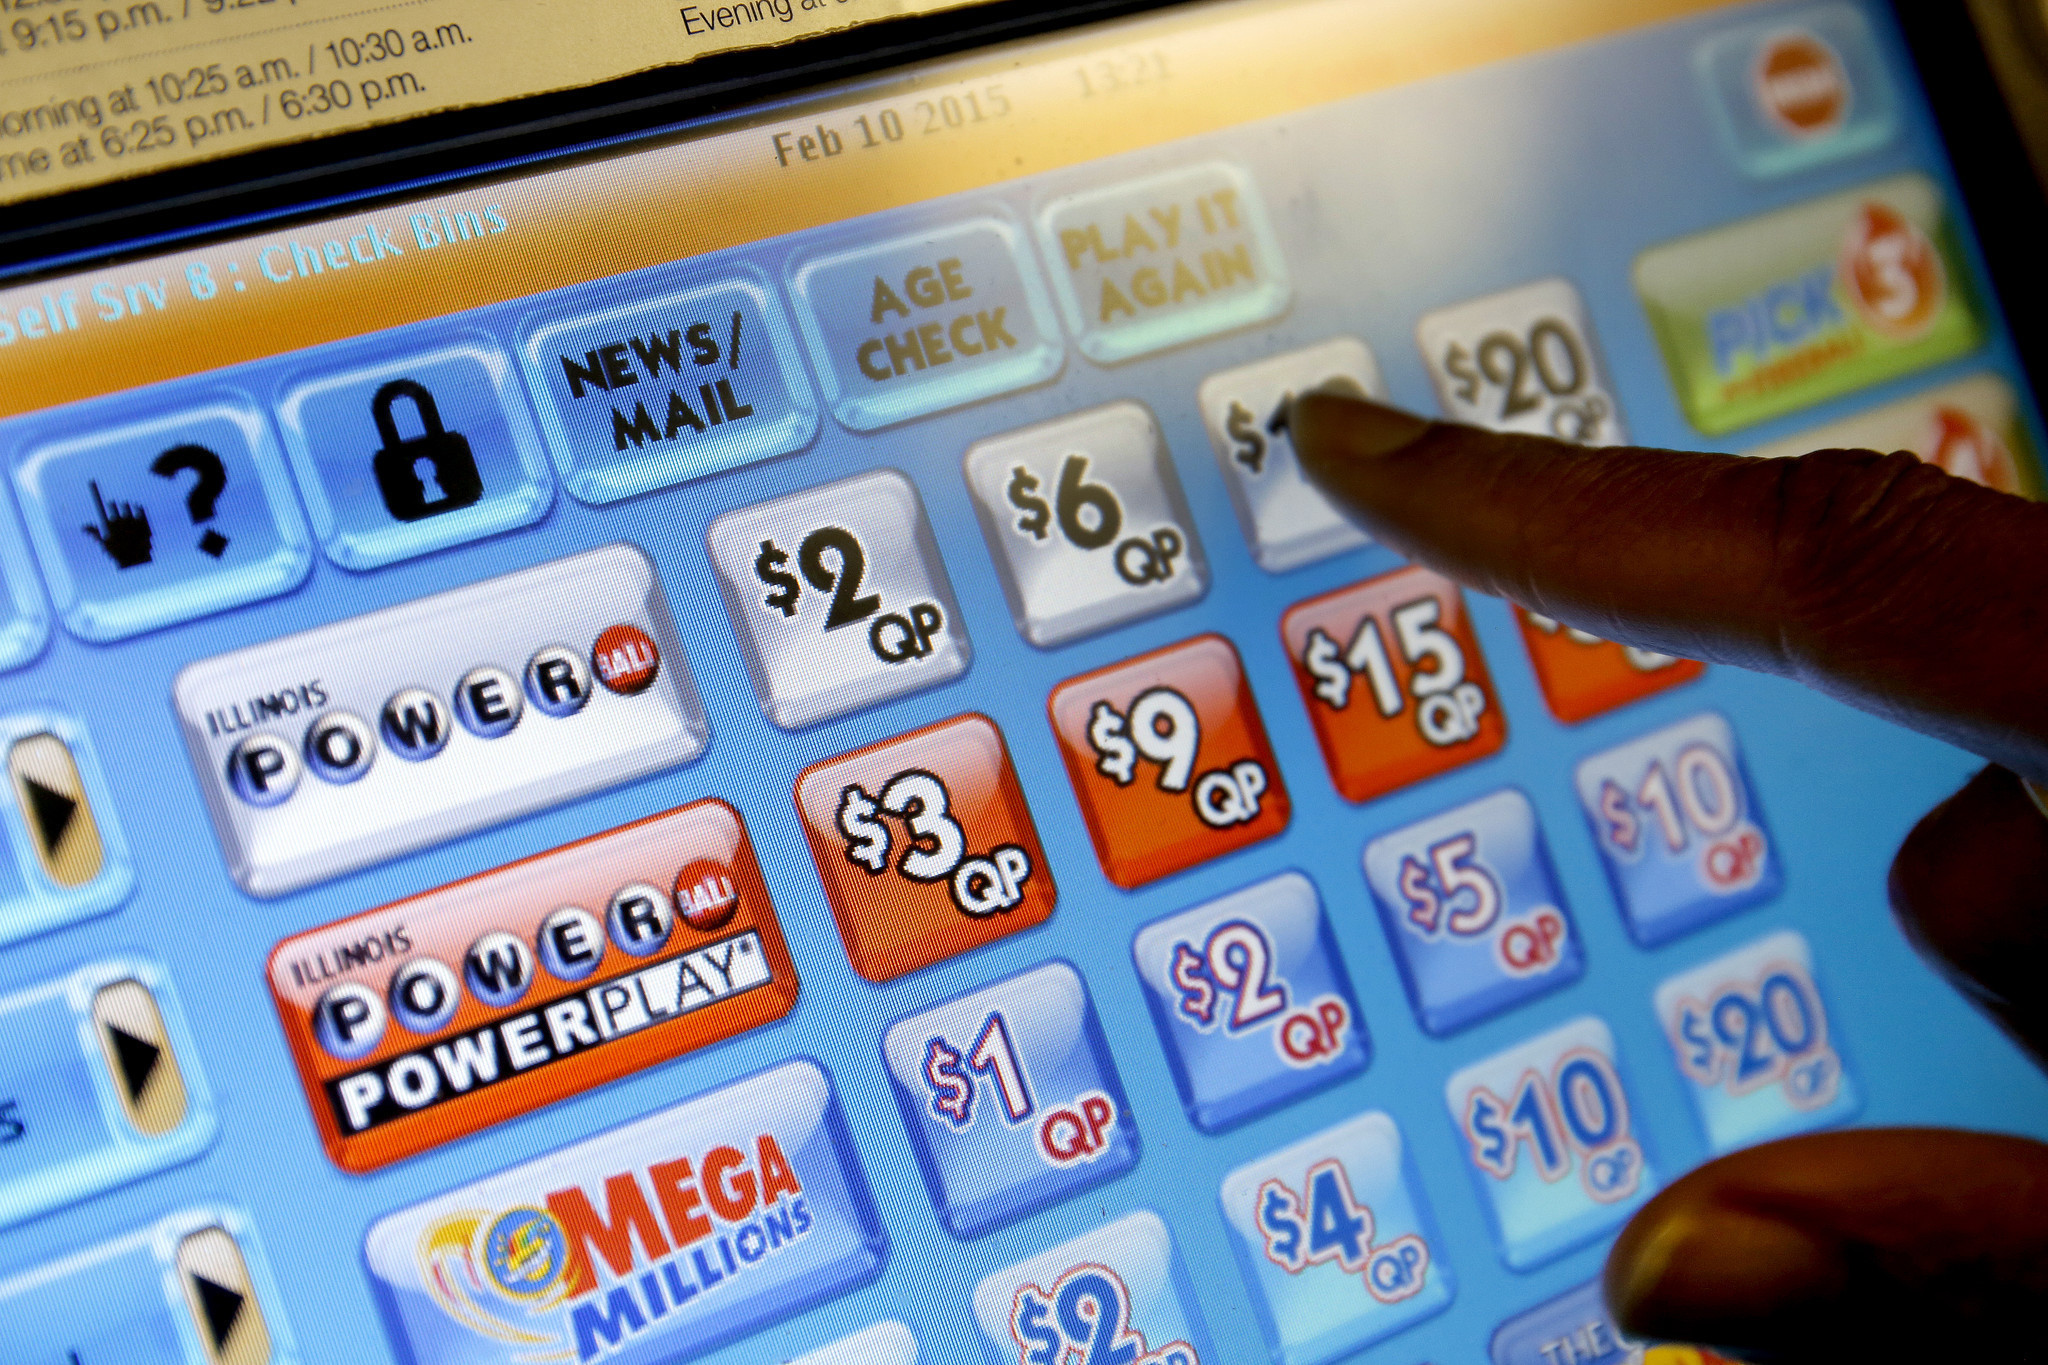 Powerball jackpot swells to $348 million for Wednesday's drawing - Chicago Tribune2048 x 1365